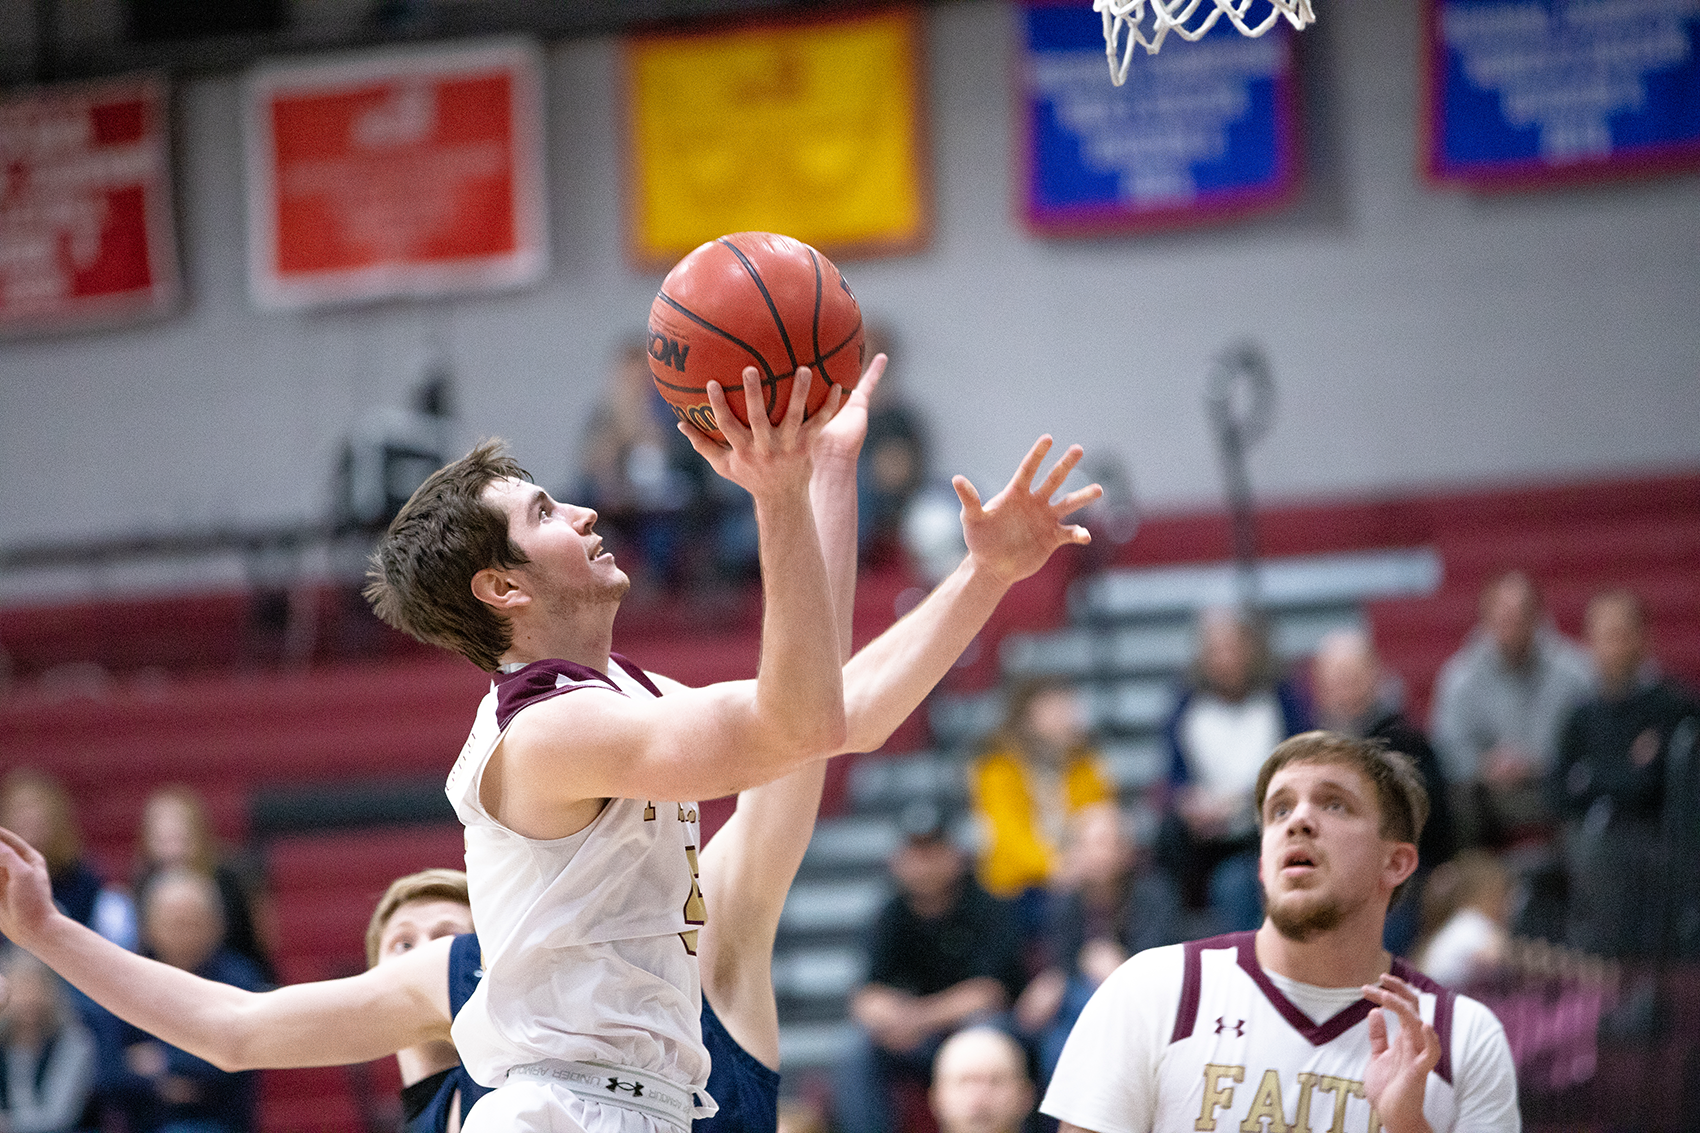 Jayce Goergen scored a career-high 38 points in the opening round of the MCCC Tournament